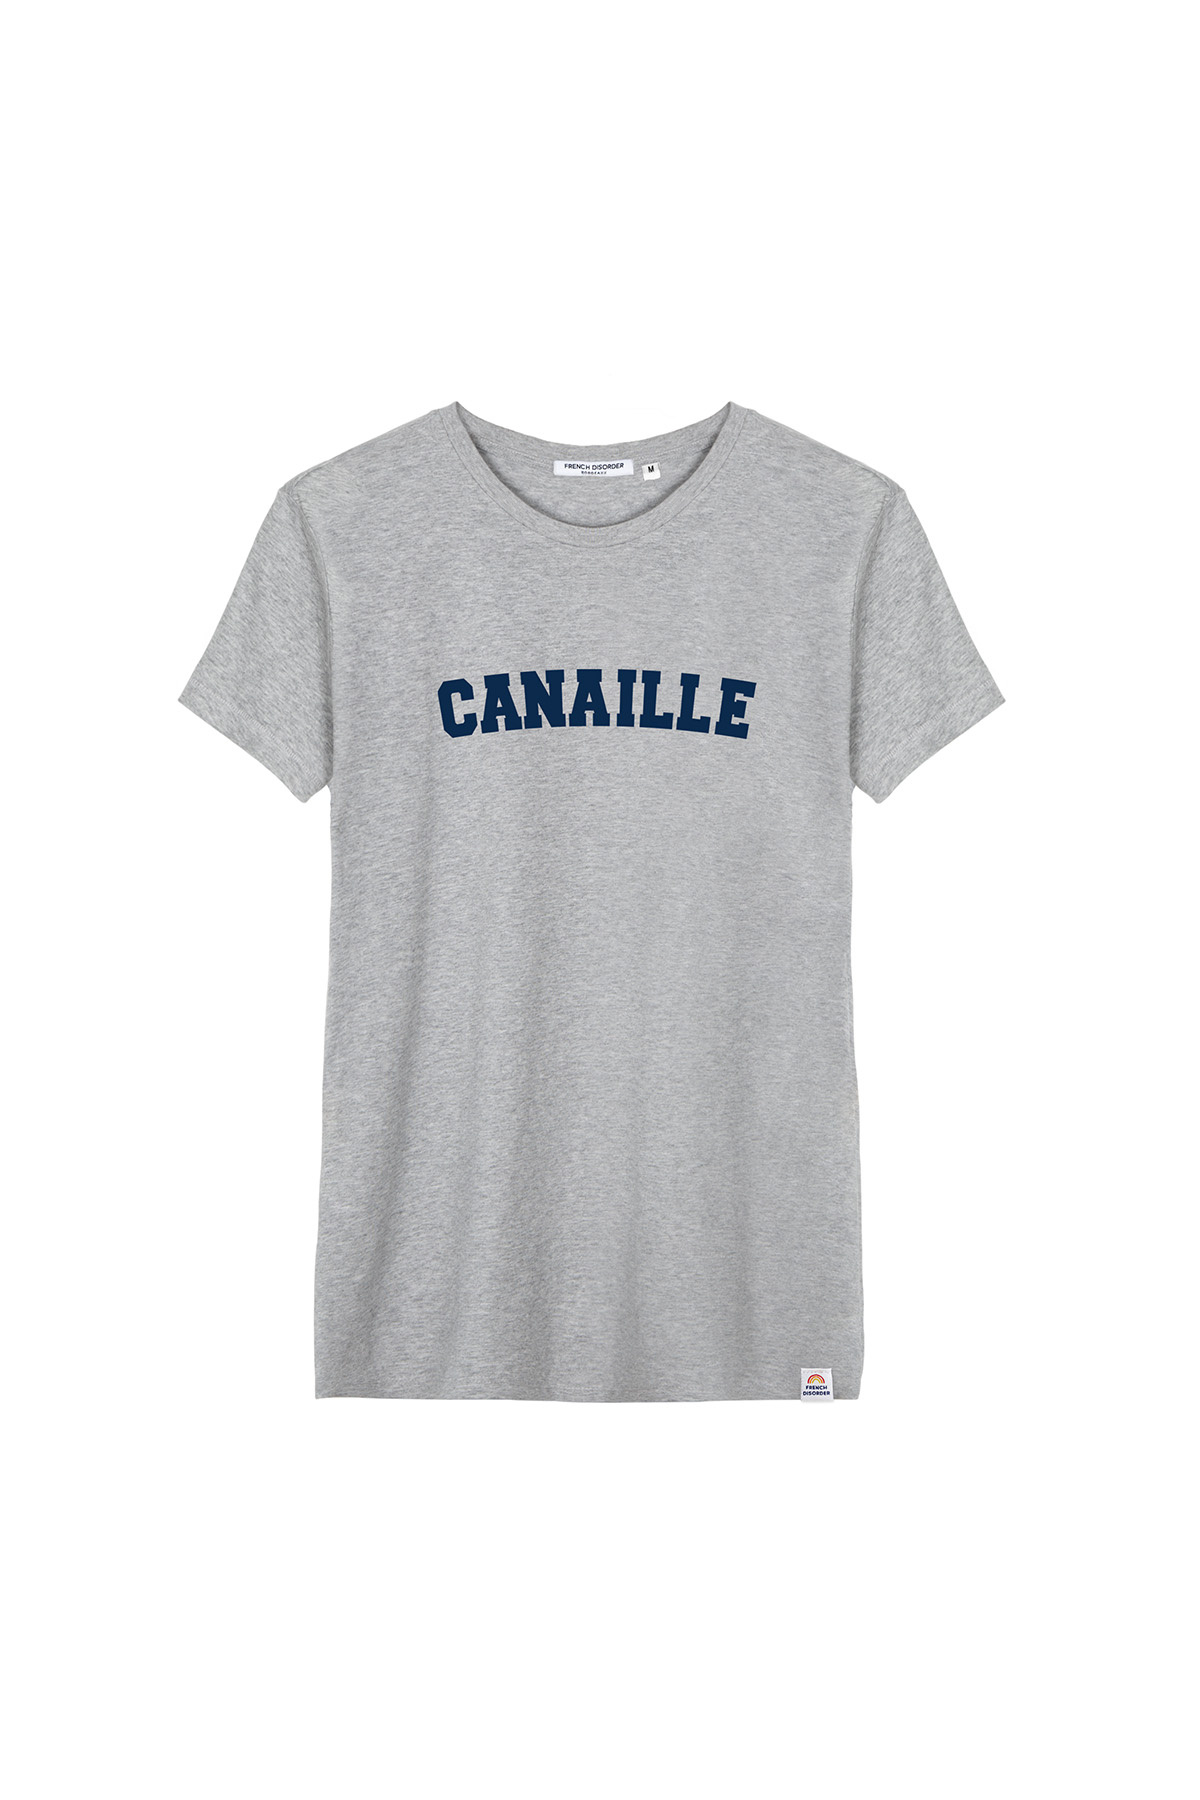 Tshirt CANAILLE